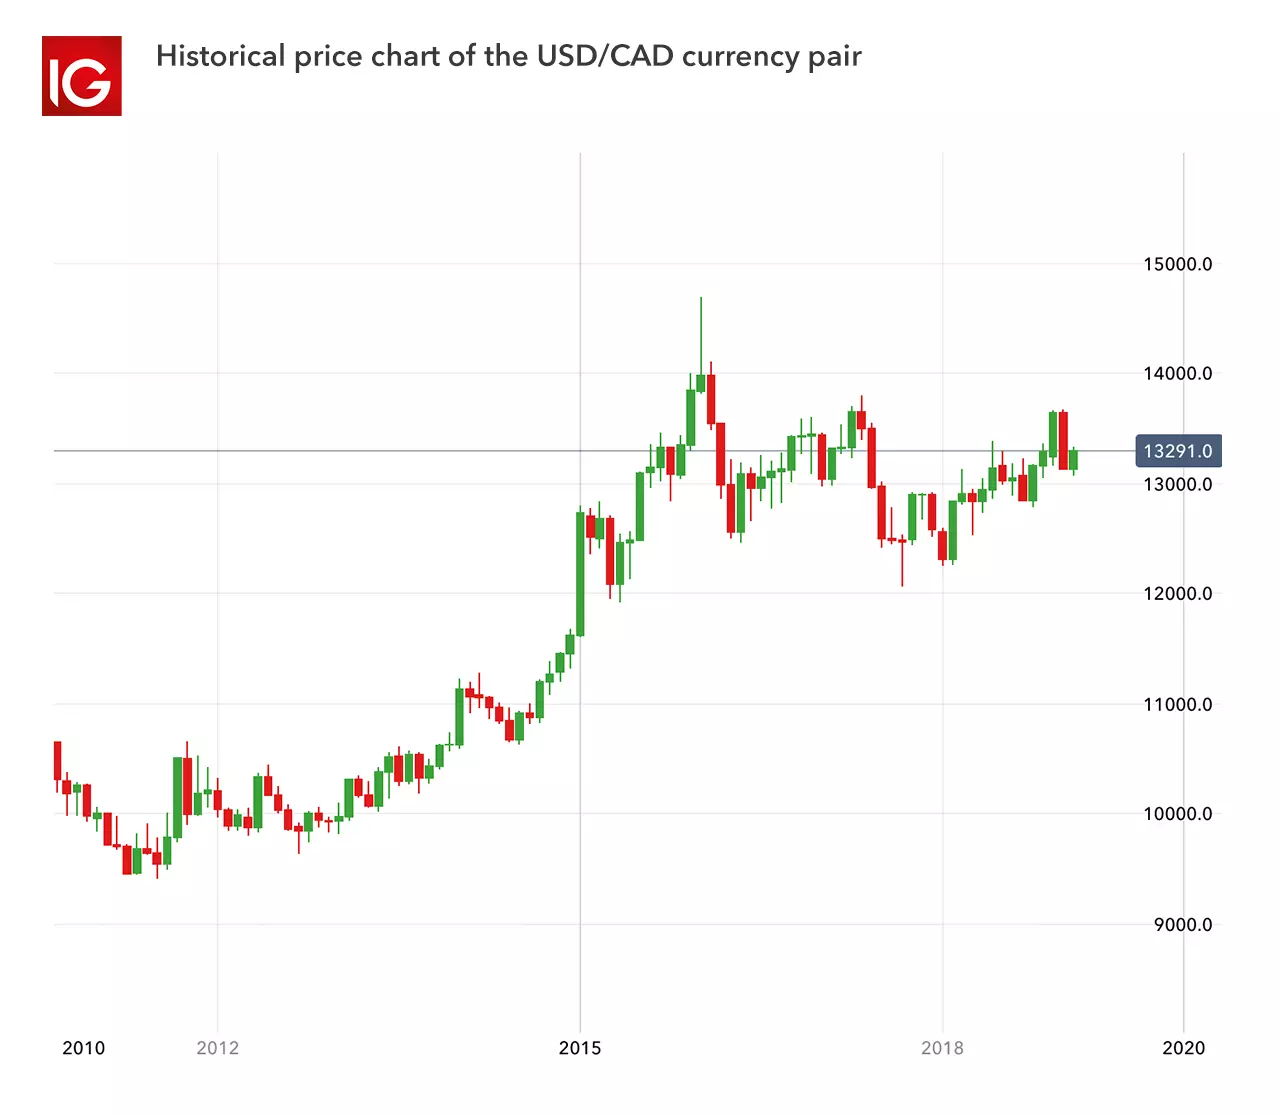 One of the most traded forex pairs is USD/CAD